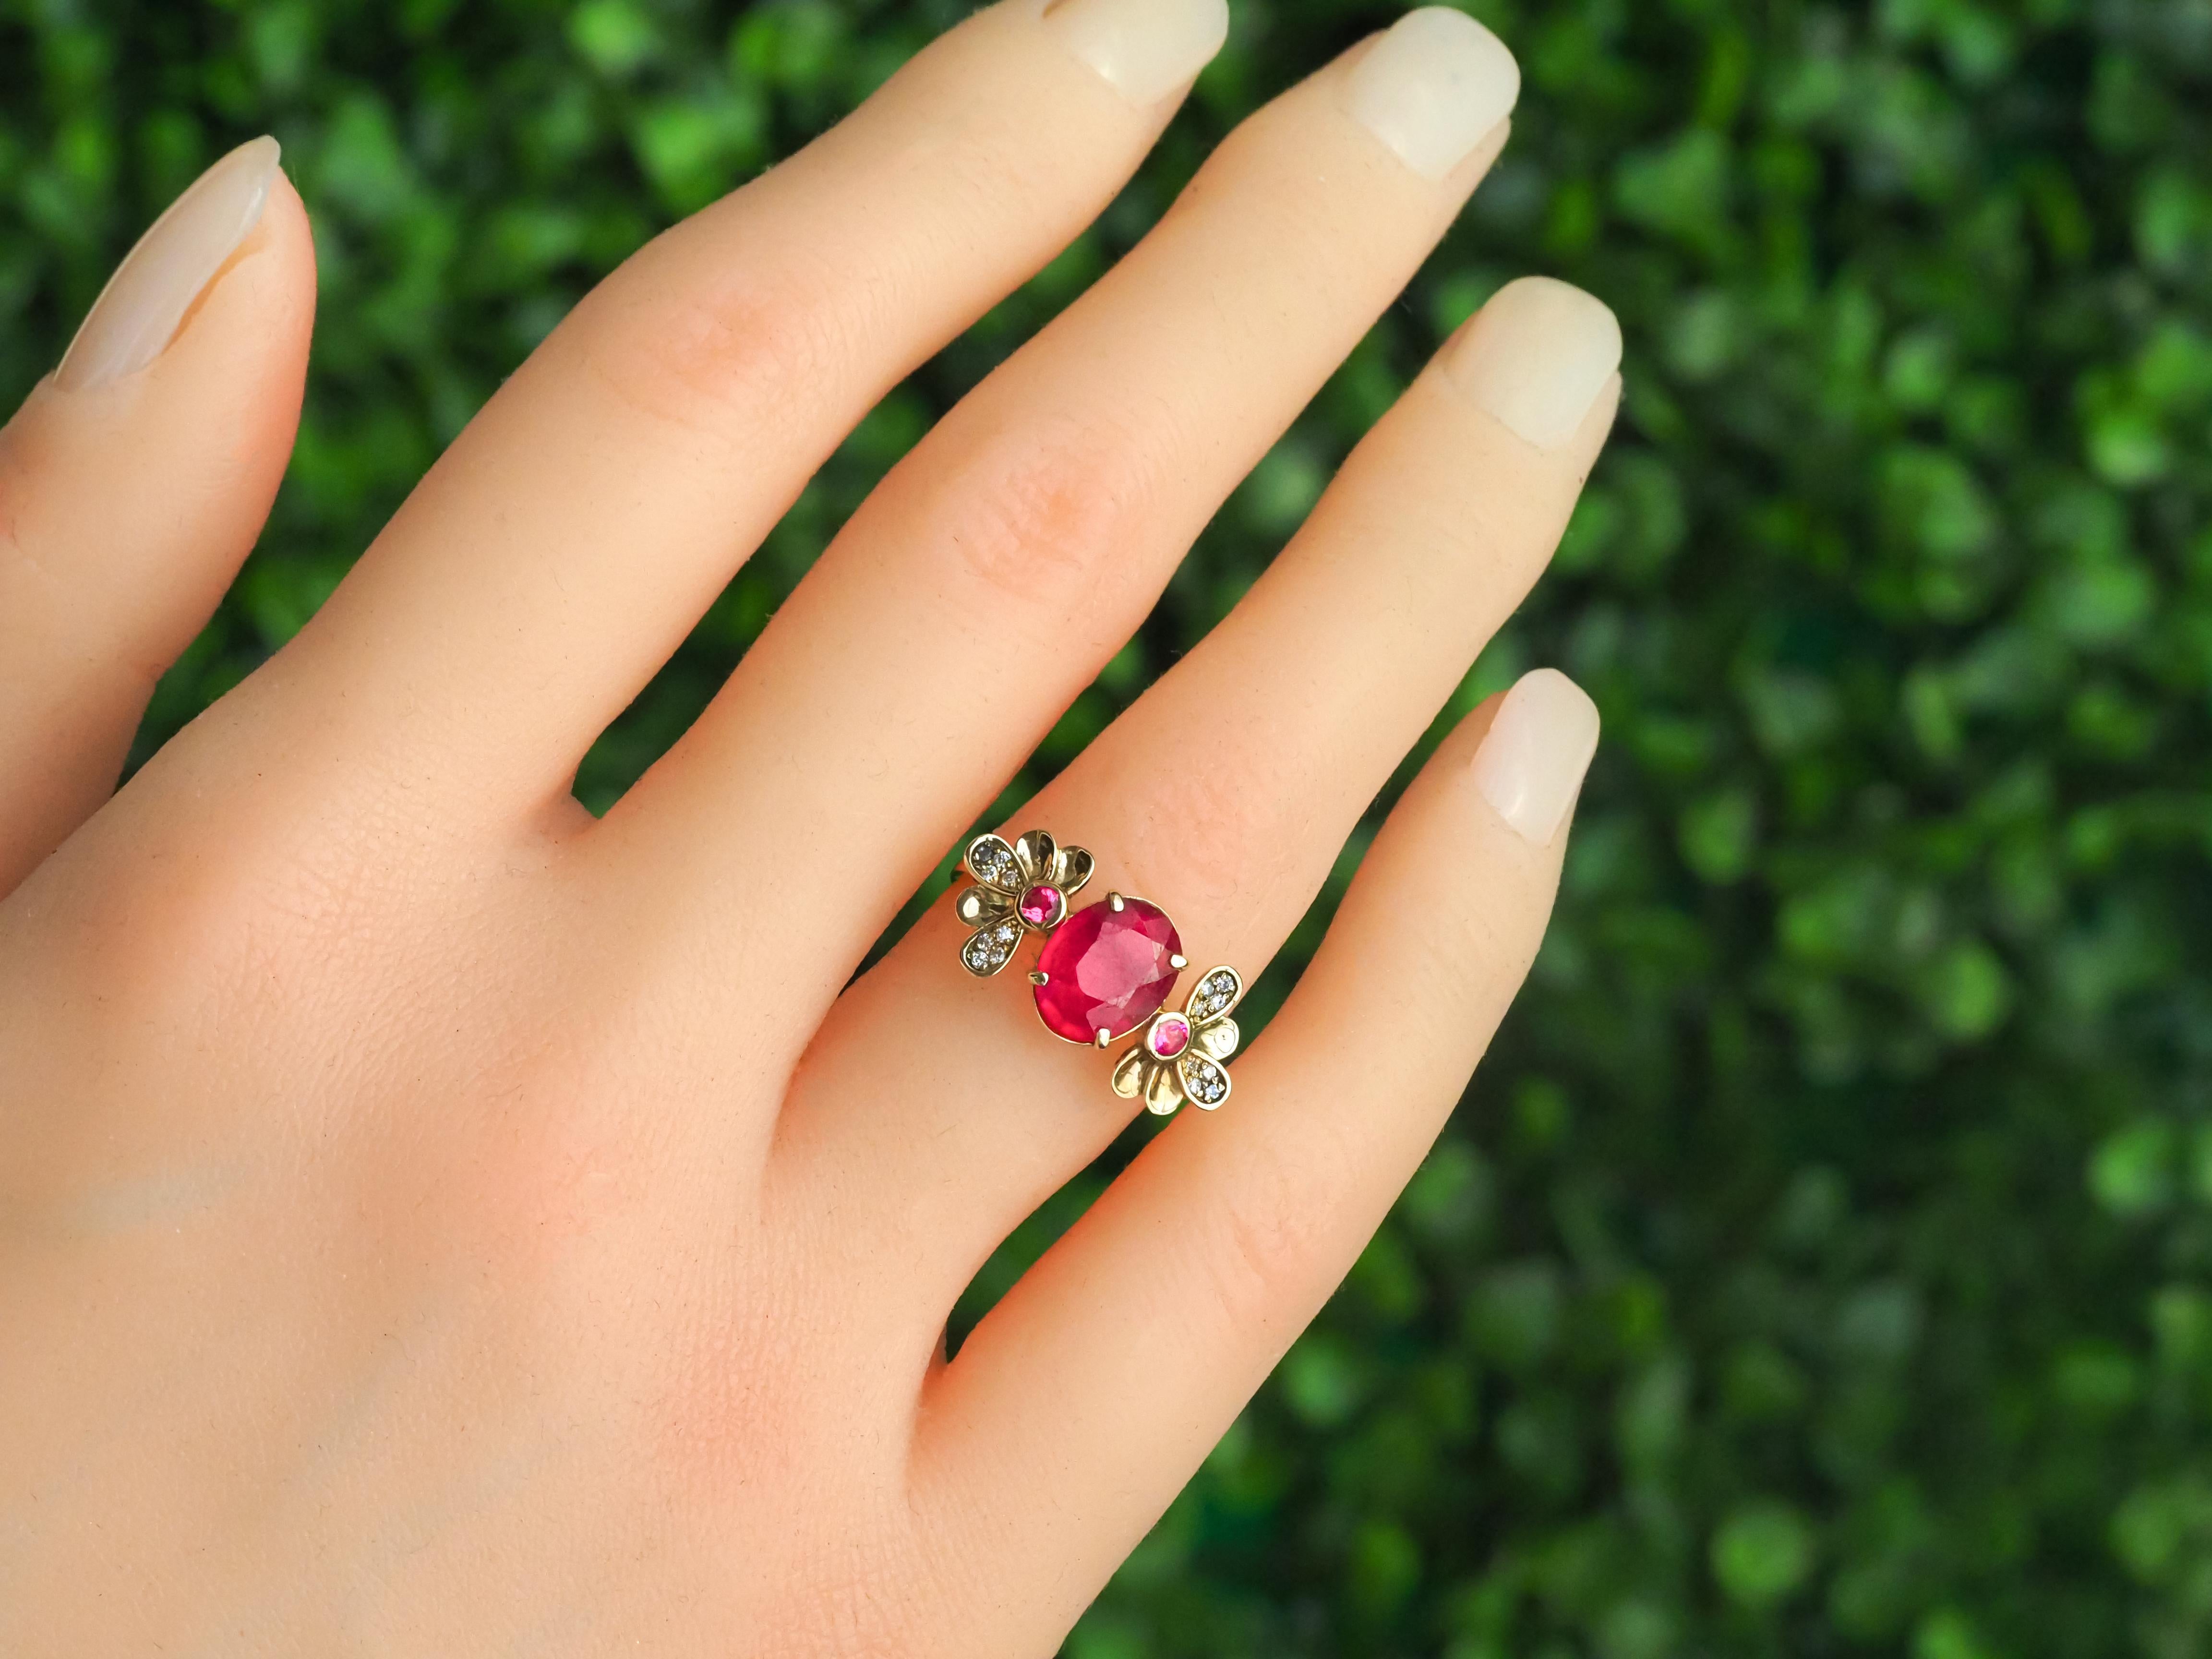 For Sale:  14 Karat Gold Ring with Ruby and Diamonds. Flower design ruby ring 11